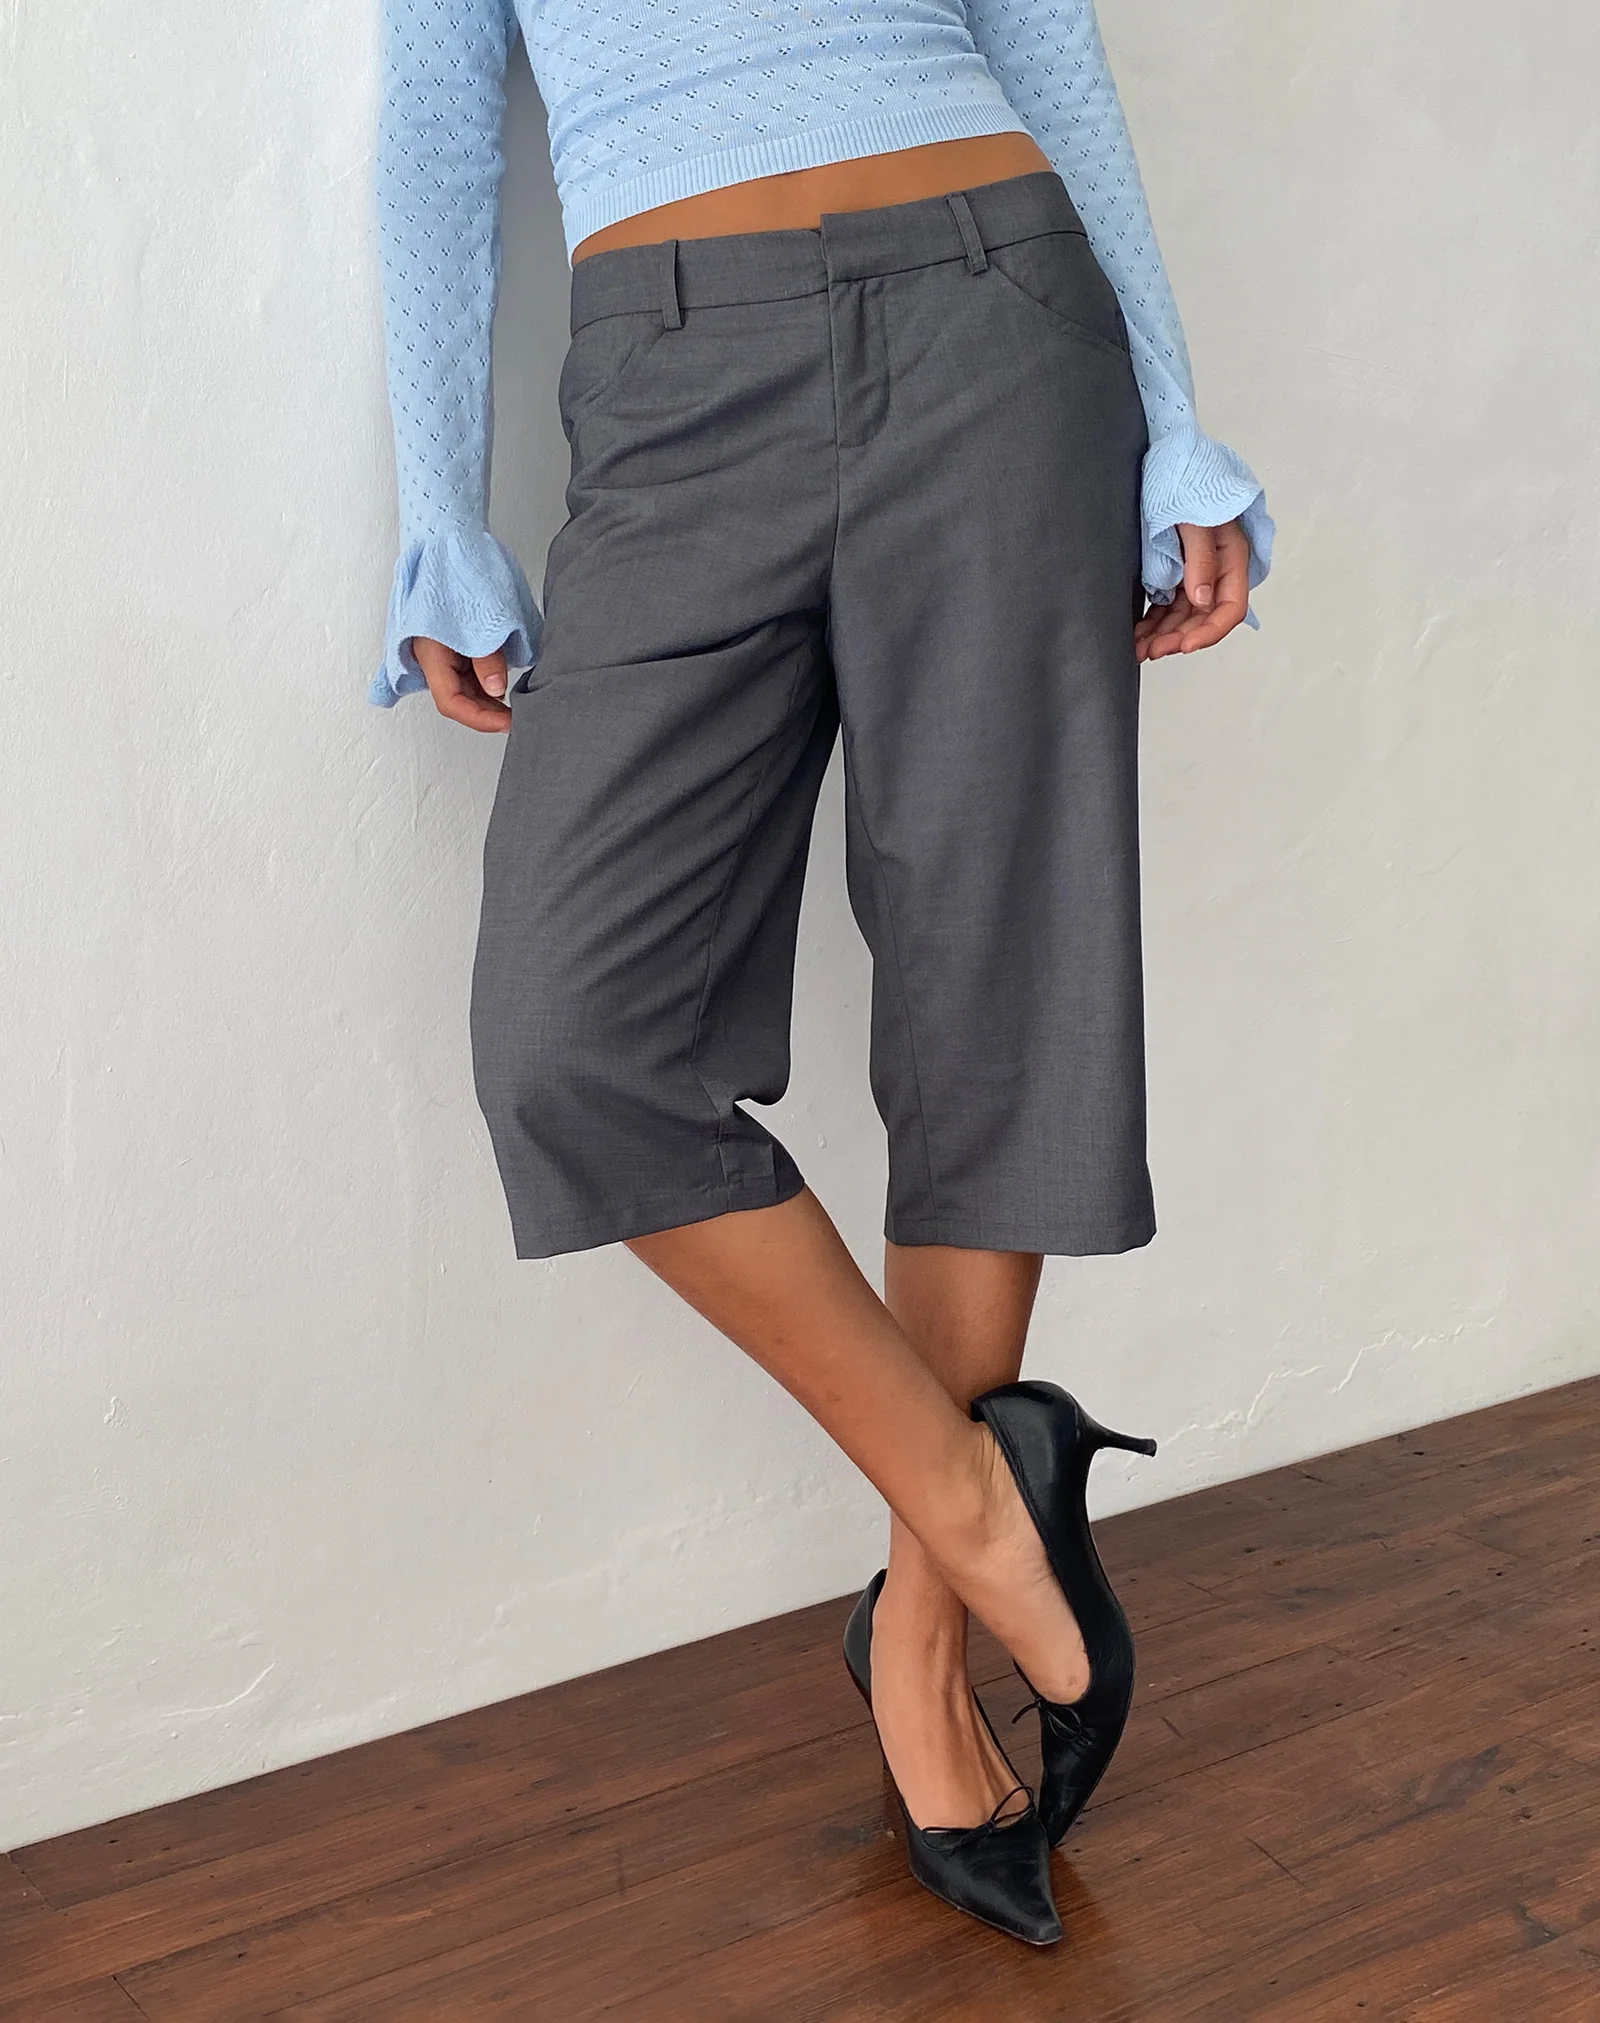 Versatile and Stylish: Grey Trousers for Effortless Elegance